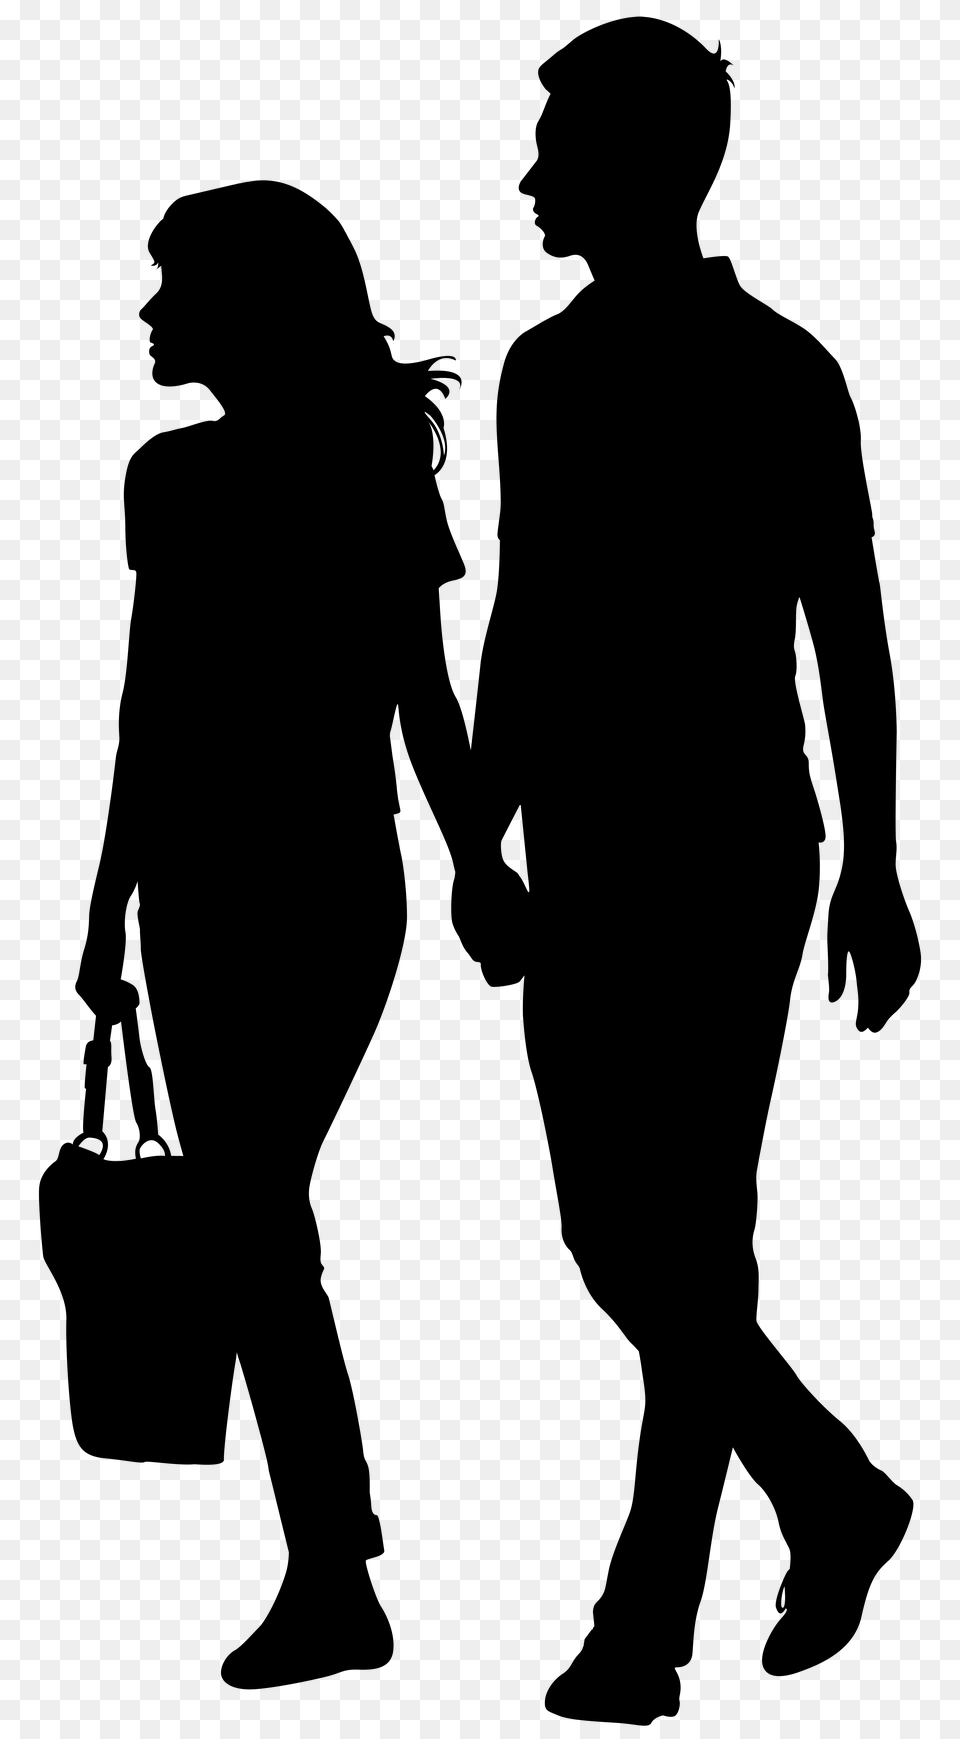 Couple Silhouette Holding Hands For Download On Ya Png Image